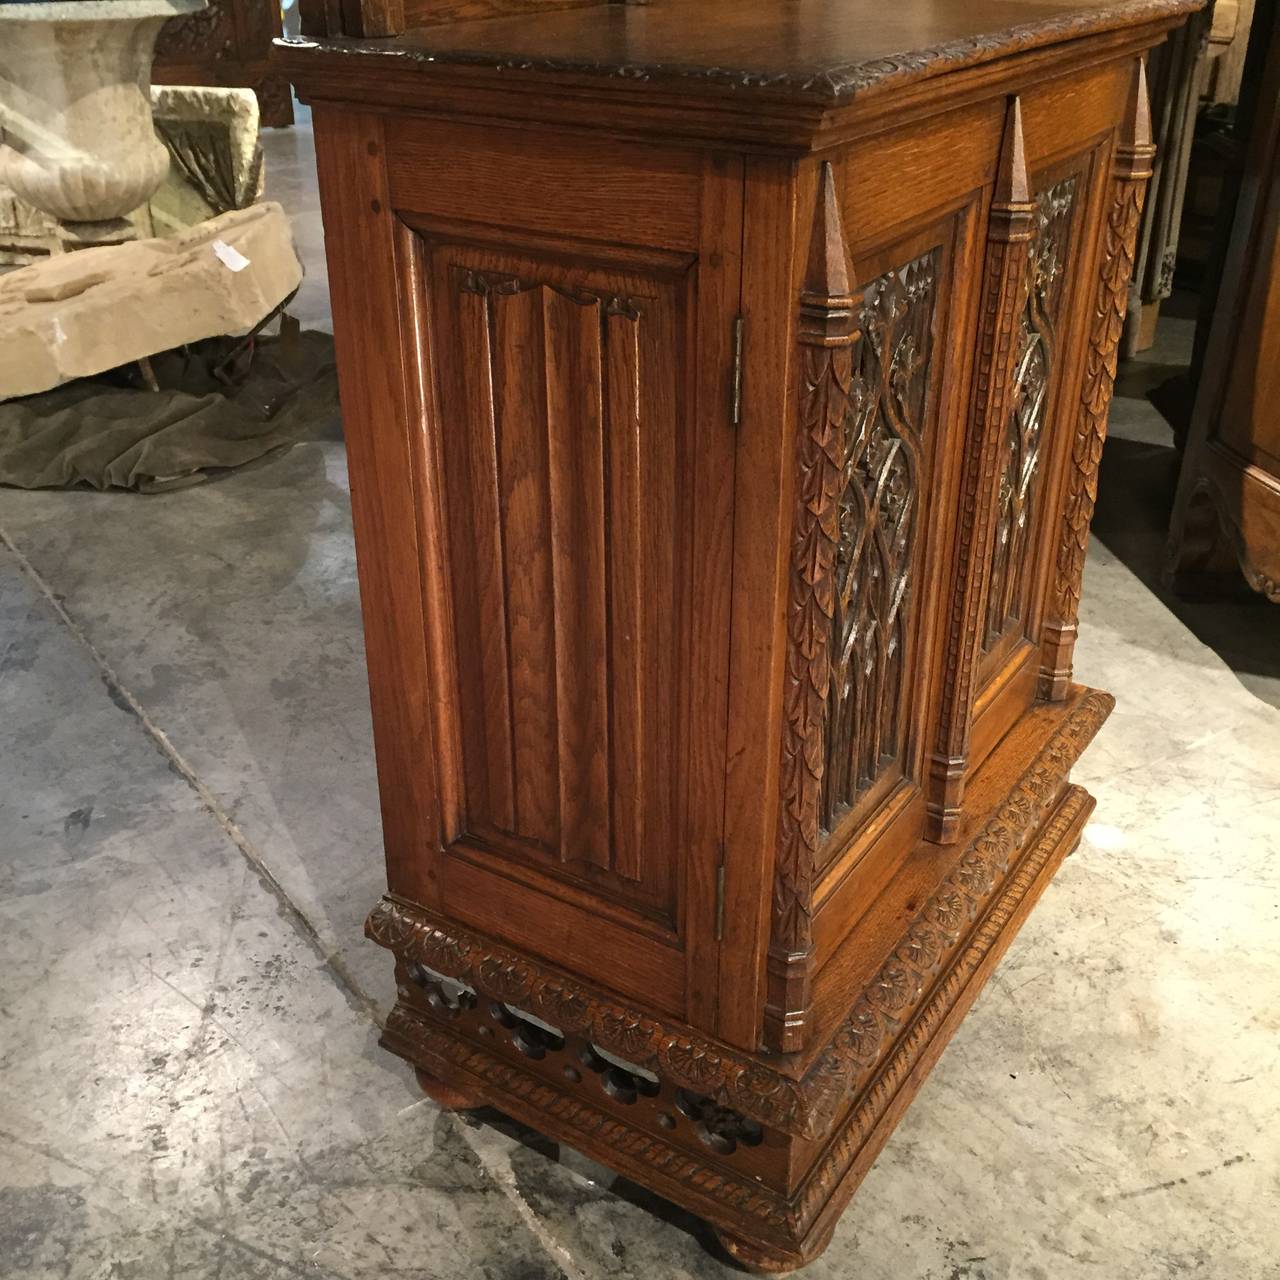 This versatile antique French Neo-Gothic cabinet, with its narrow width and depth has been carved from French Oak and is able to fit into most small spaces.  It can be used at the end of a hallway as a focal point; it could be used for wine or